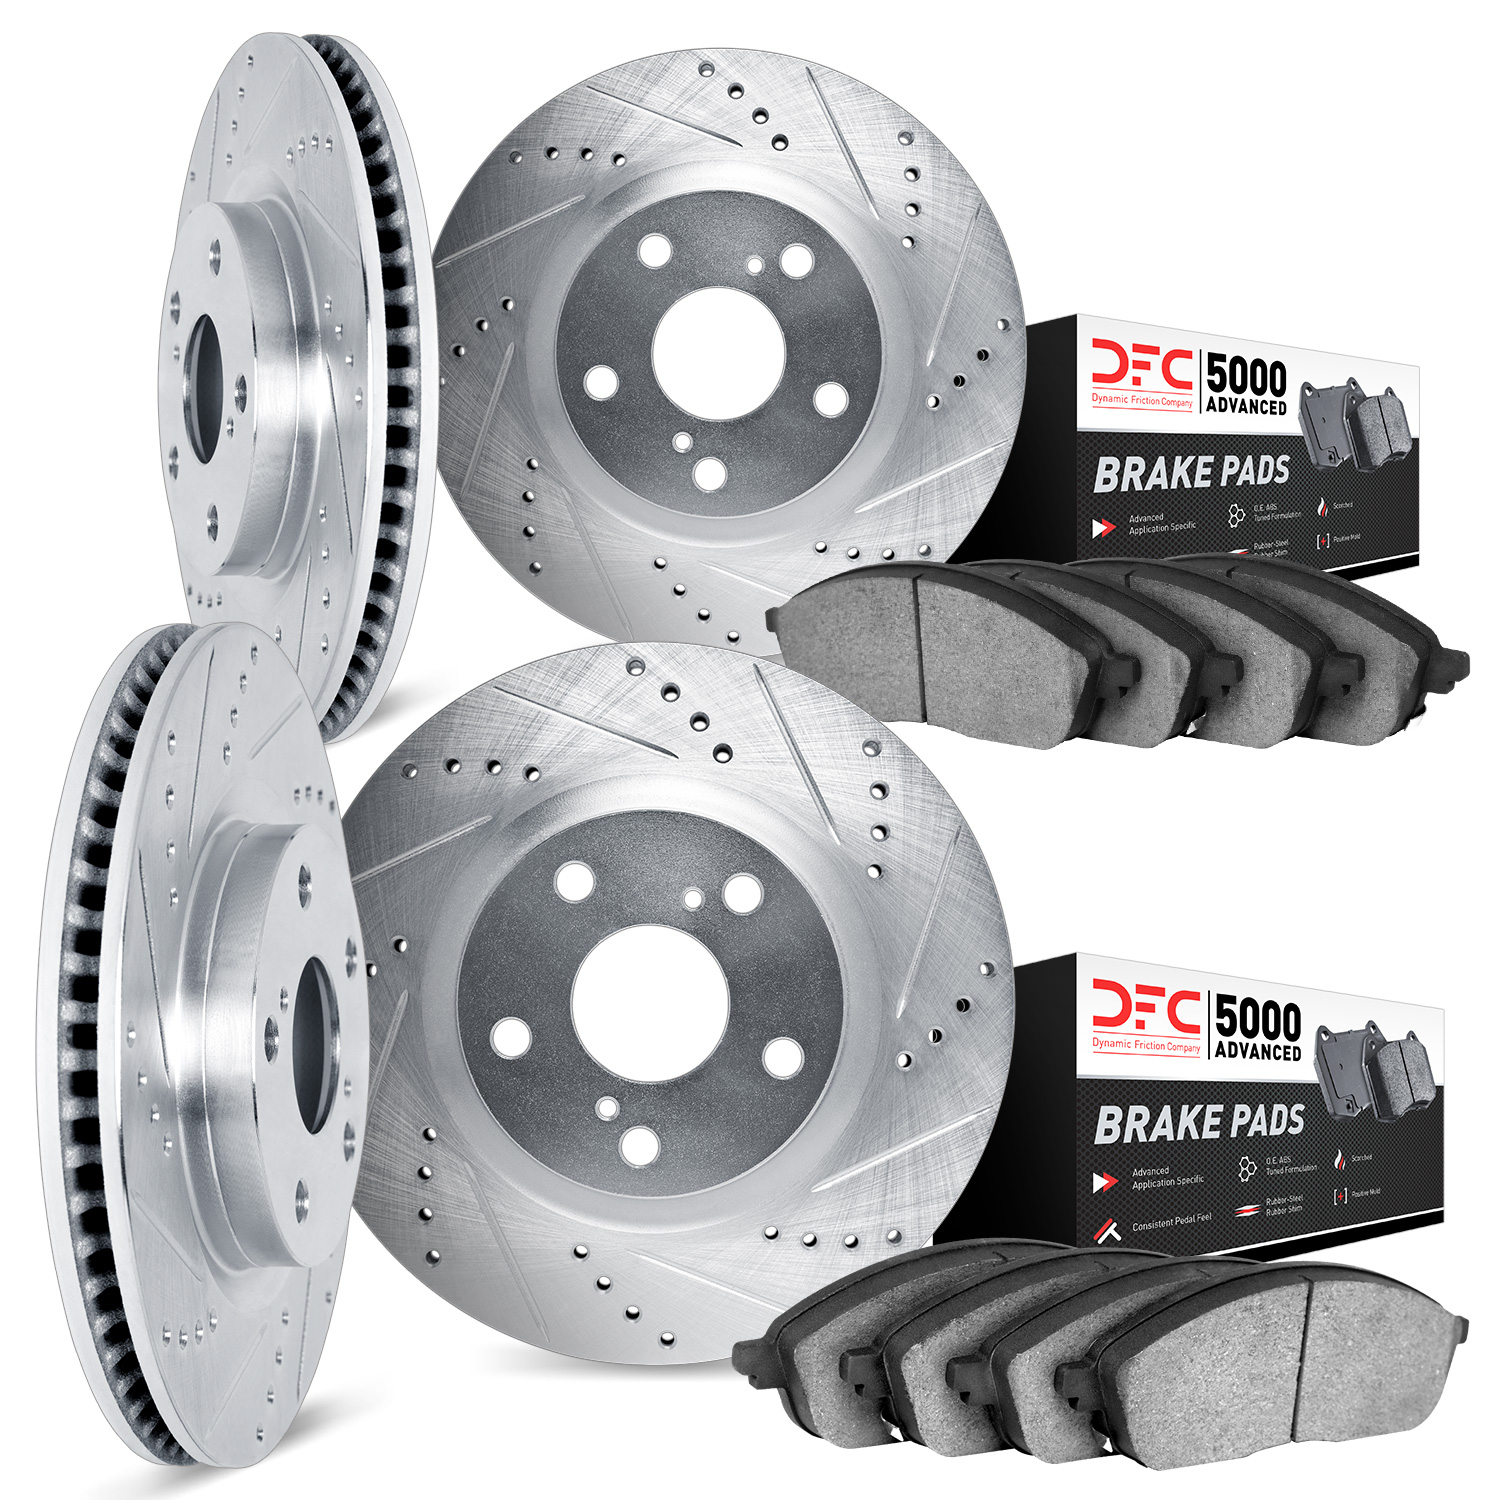 7504-75020 Drilled/Slotted Brake Rotors w/5000 Advanced Brake Pads Kit [Silver], 2007-2017 Lexus/Toyota/Scion, Position: Front a